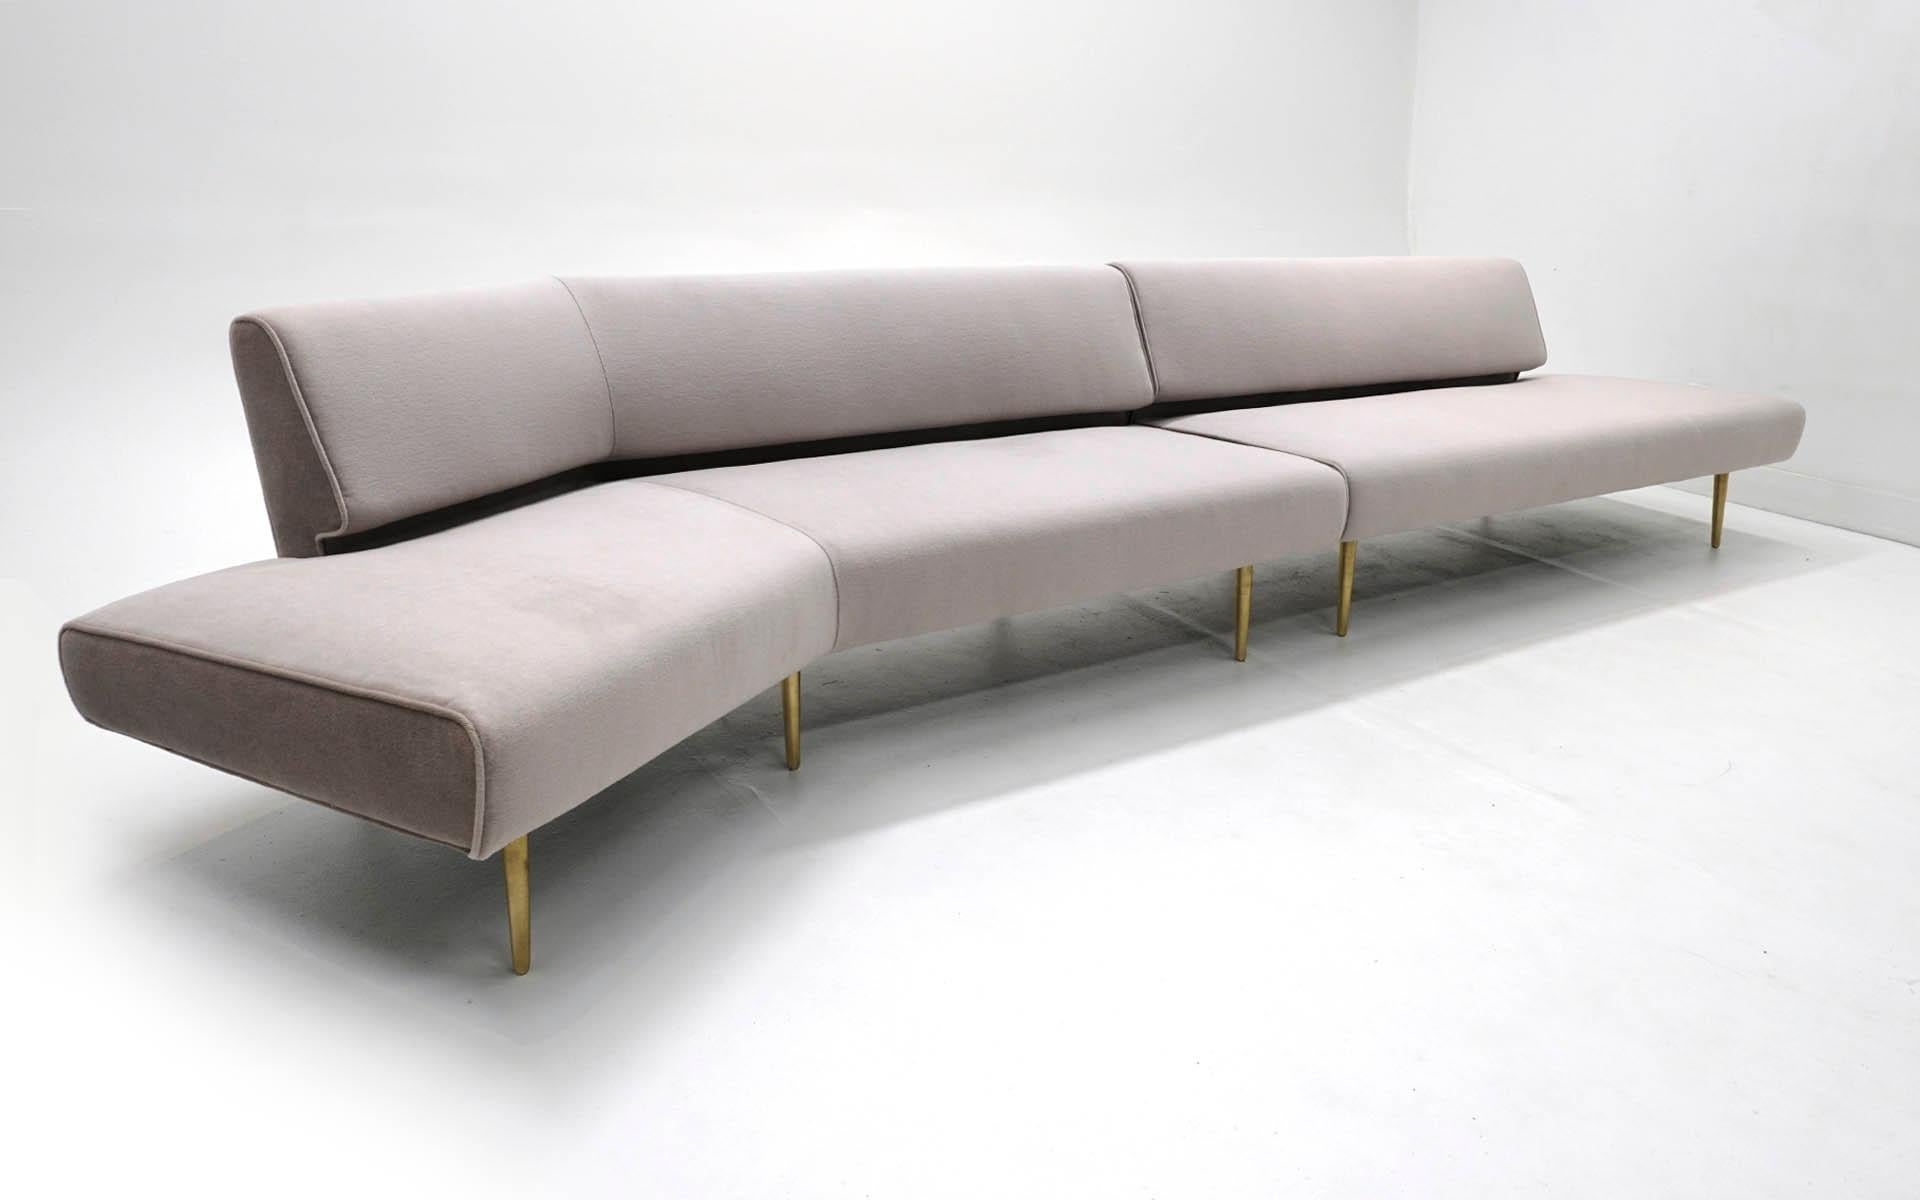 Two piece, armless, sectional sofa designed by Edward Wormley, made by Dunbar. A combination of models 4756 and 4828 in the Dunbar Catalog. The backless end on the angled piece (4756) curves towards the front at a 30 degree angle. The straight piece